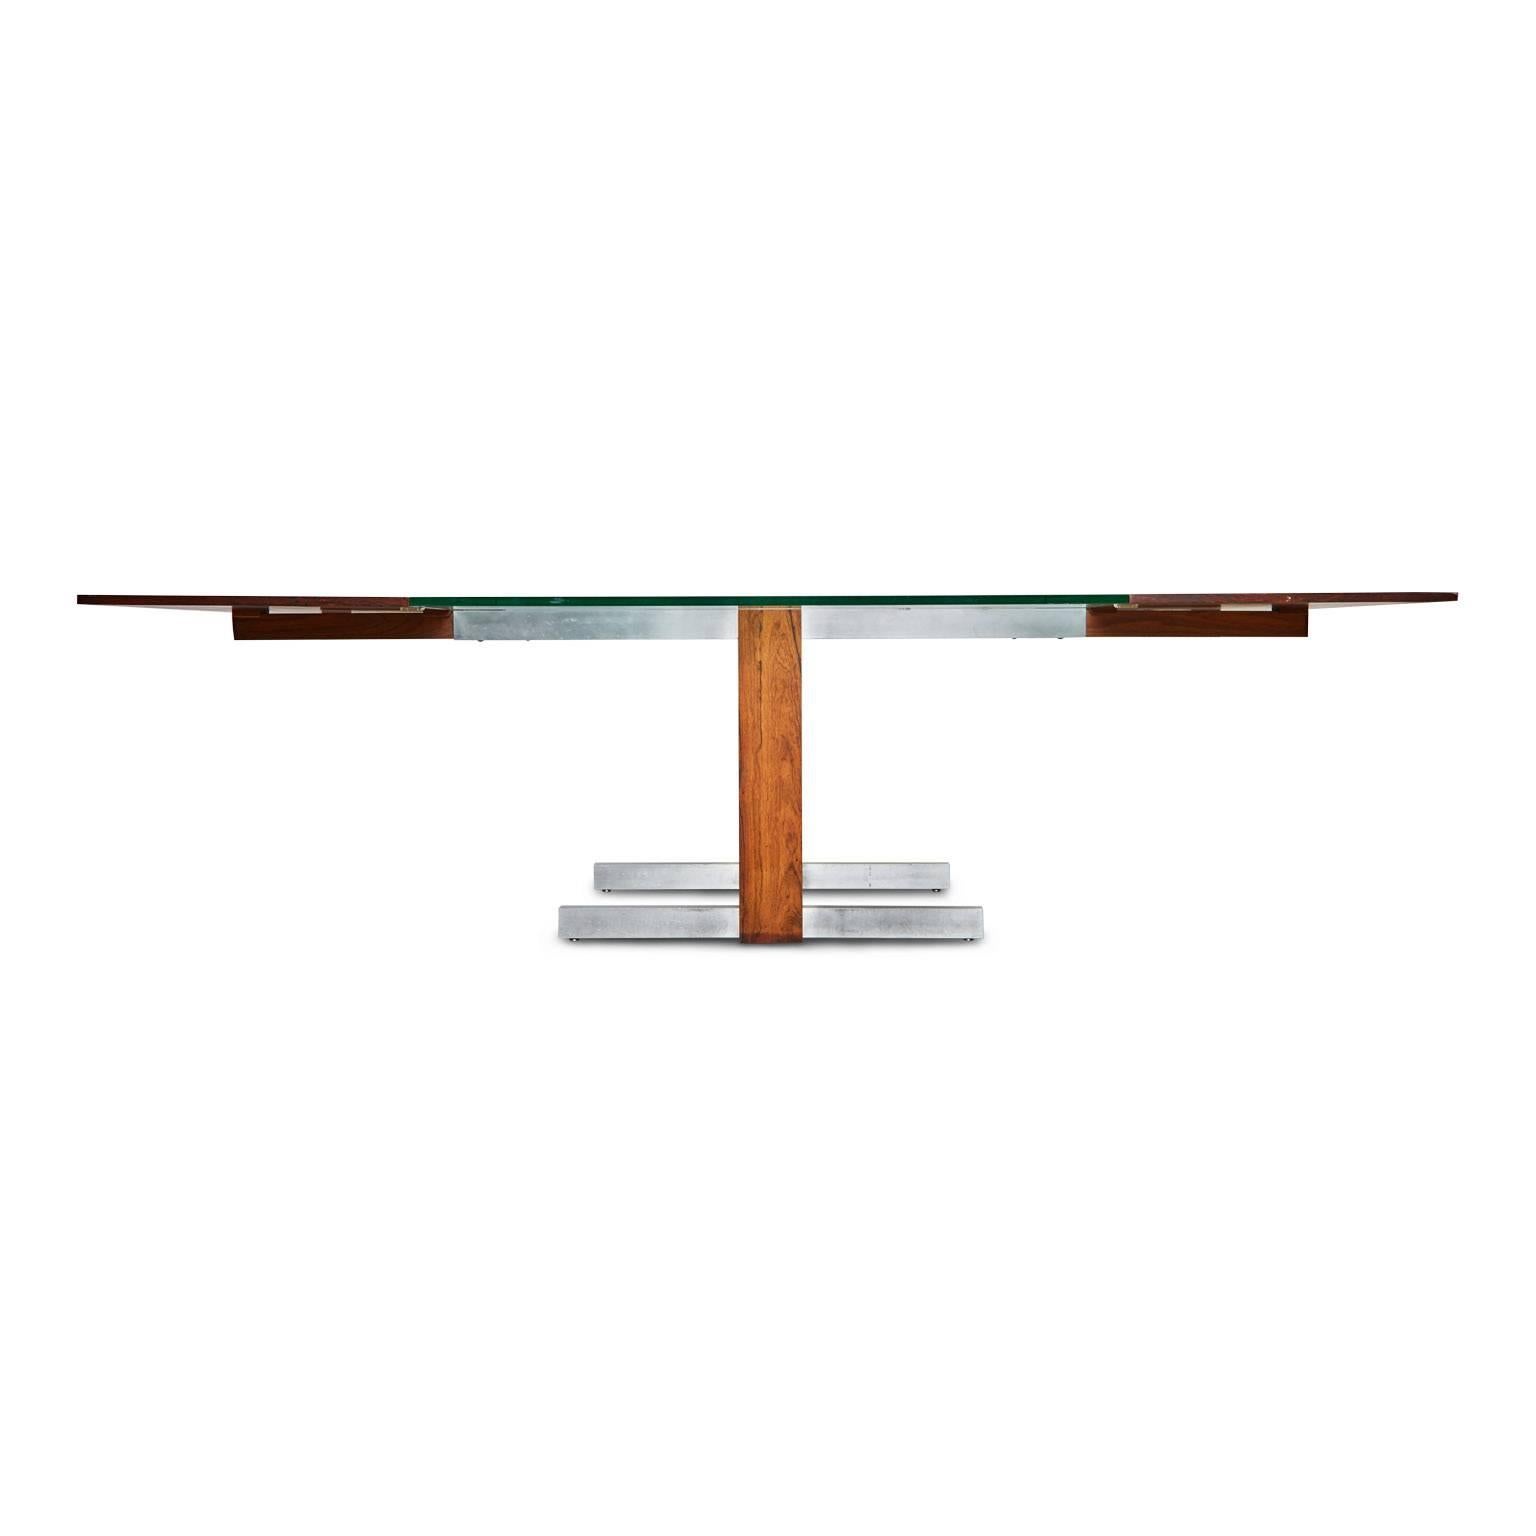 The sleek modern design of this innovative cubist table by Vladimir Kagan makes this piece as relevant and prominent today as it was when first issued. The versatility of this piece allows for it to be used as a compact glass table, or fully